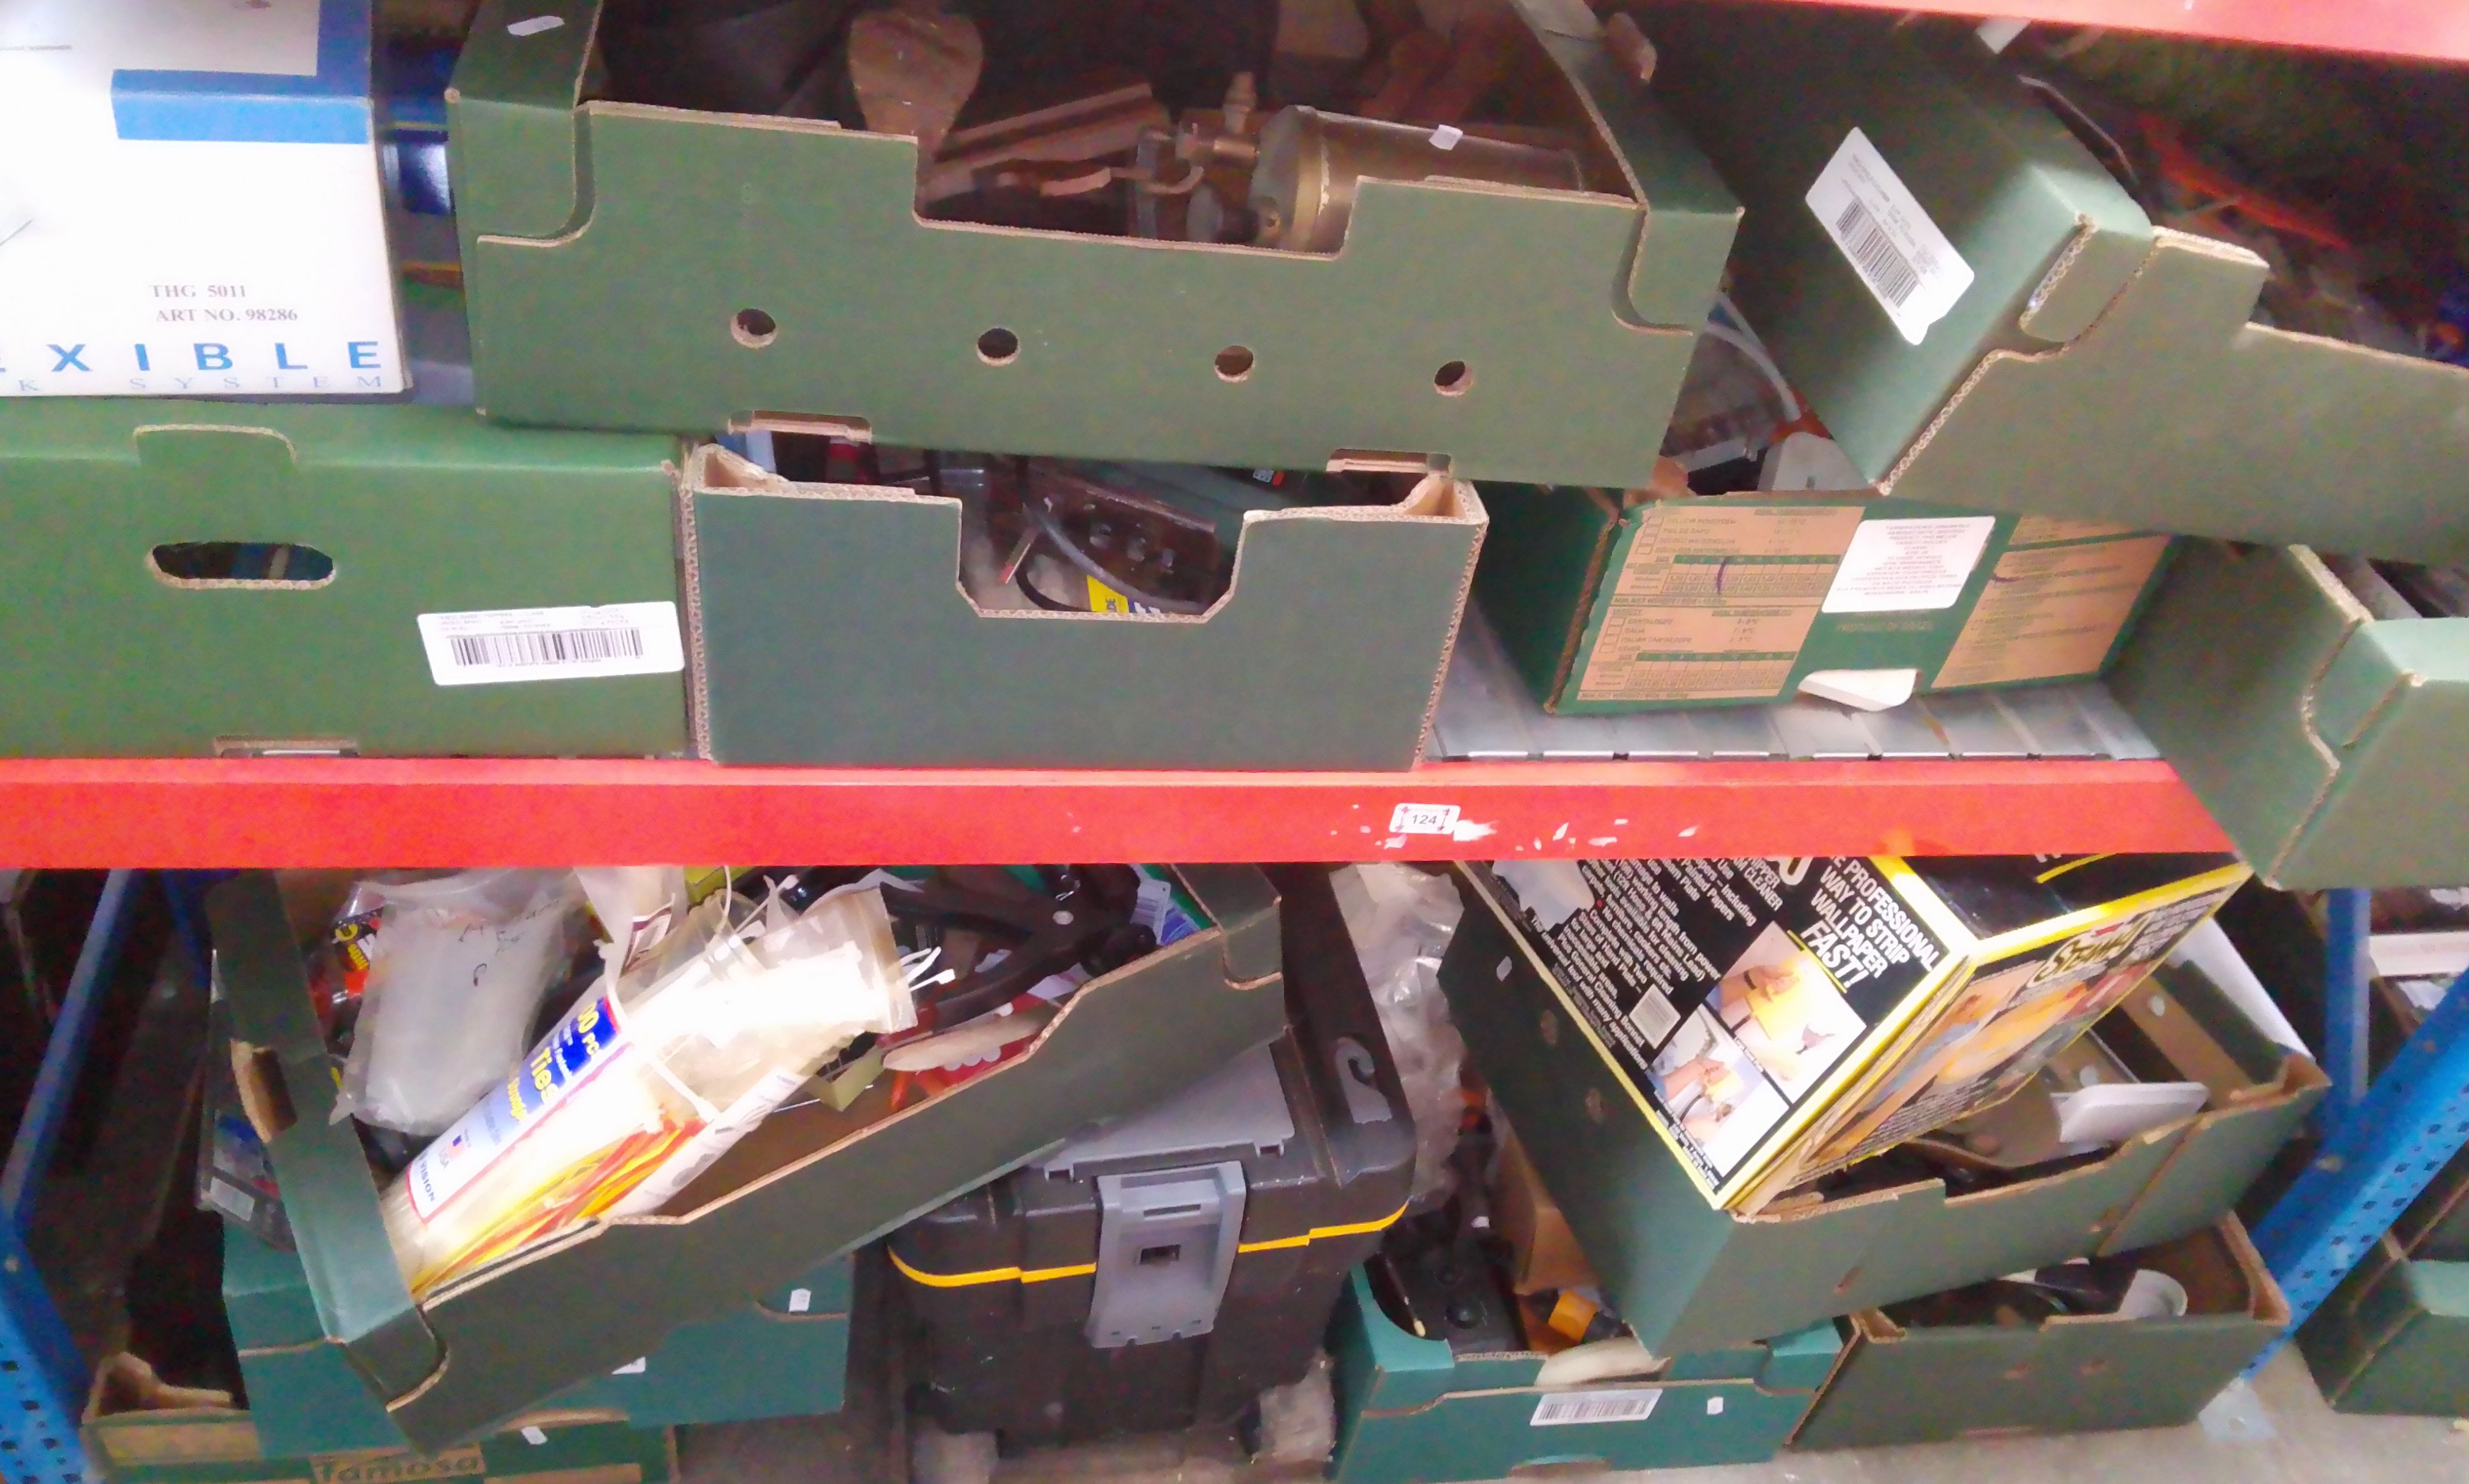 15 boxes of garage ware and tools including hand tools, vintage planes, clamps, pipe ware, drill